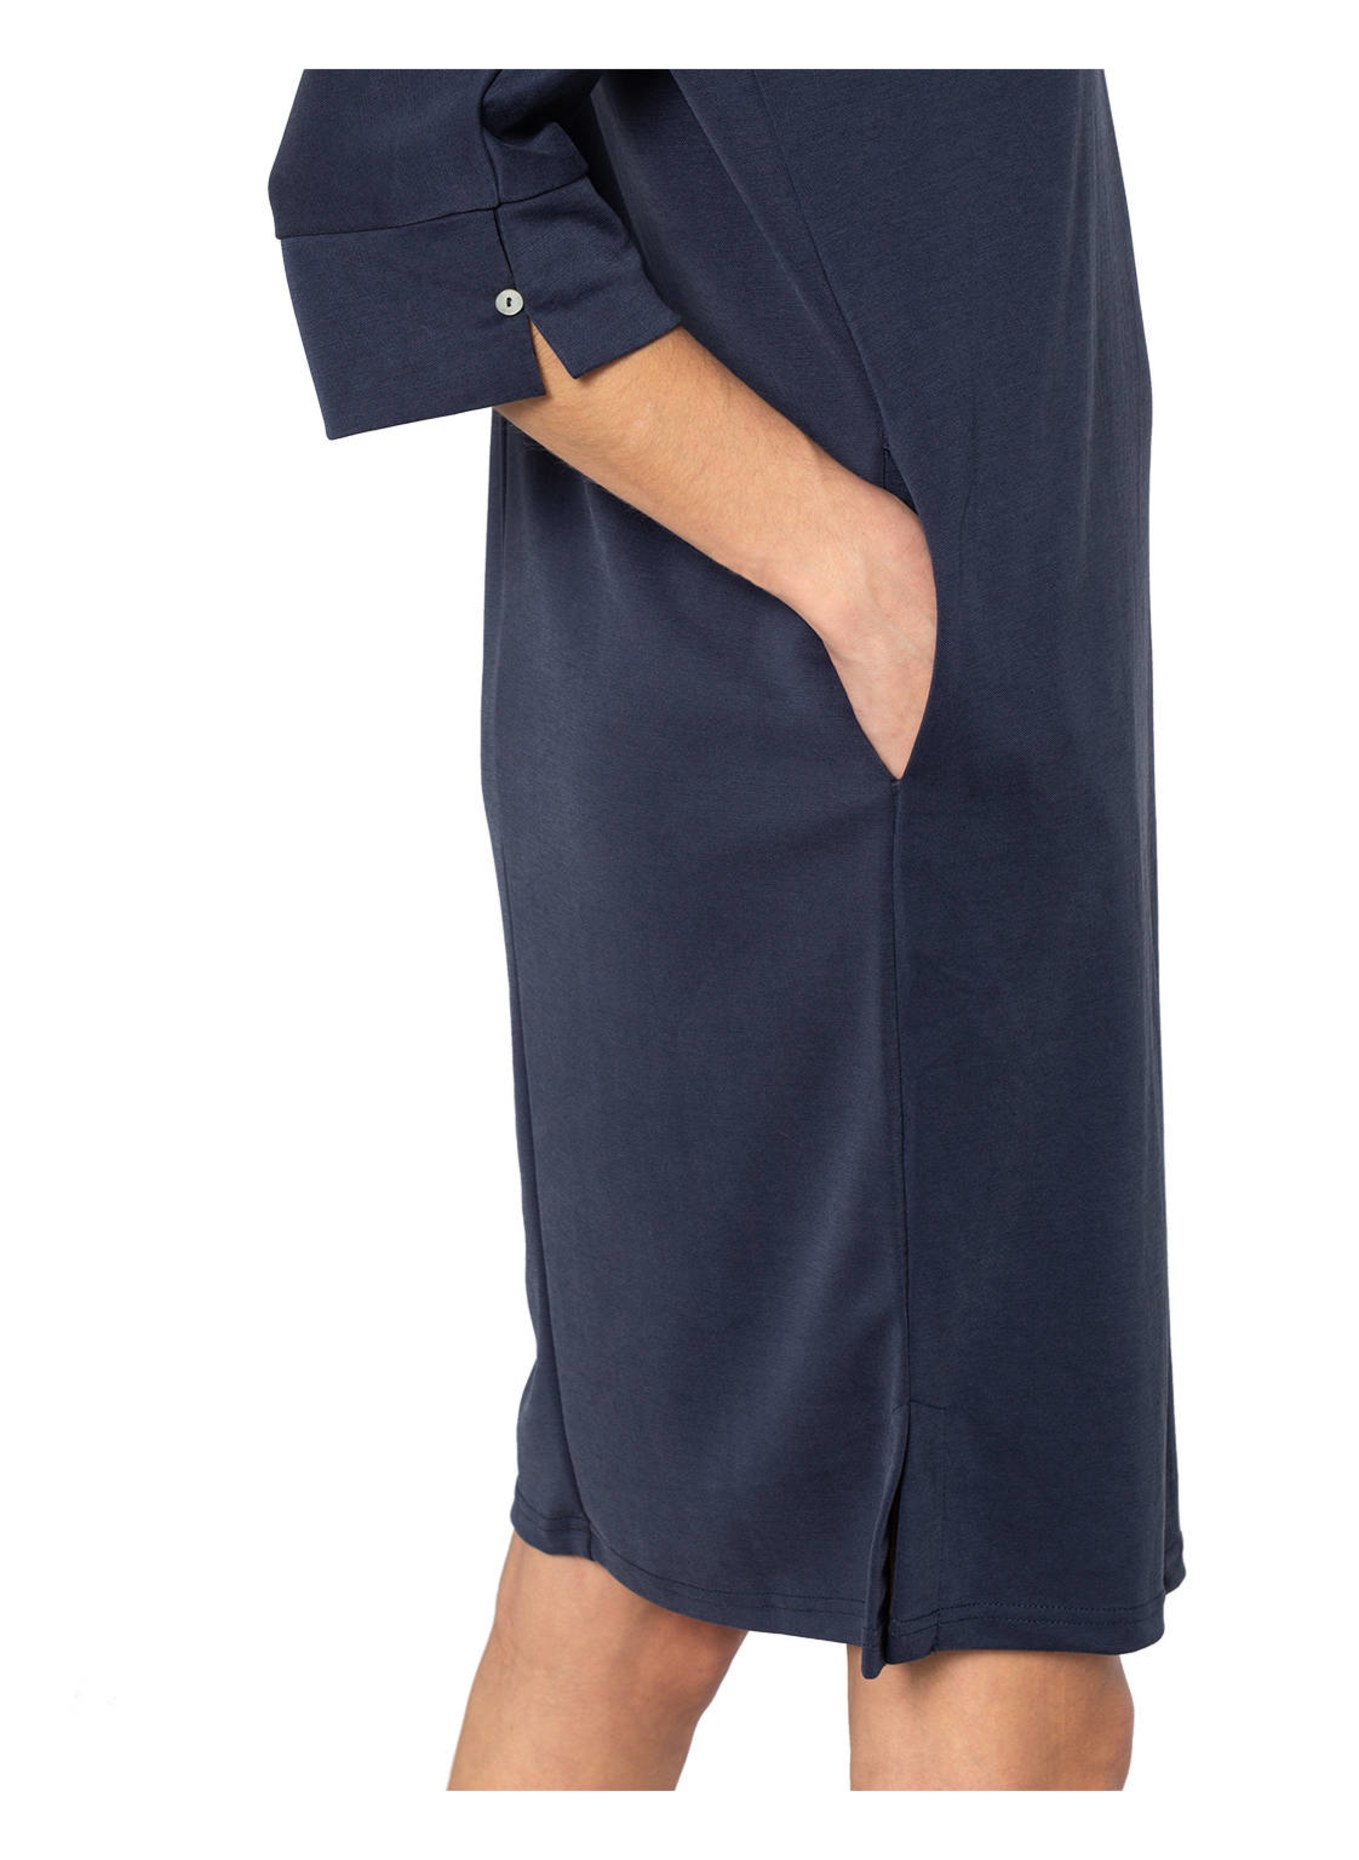 JcSophie Jersey dress CHANTELLE with 3/4 sleeves, Color: DARK BLUE (Image 4)